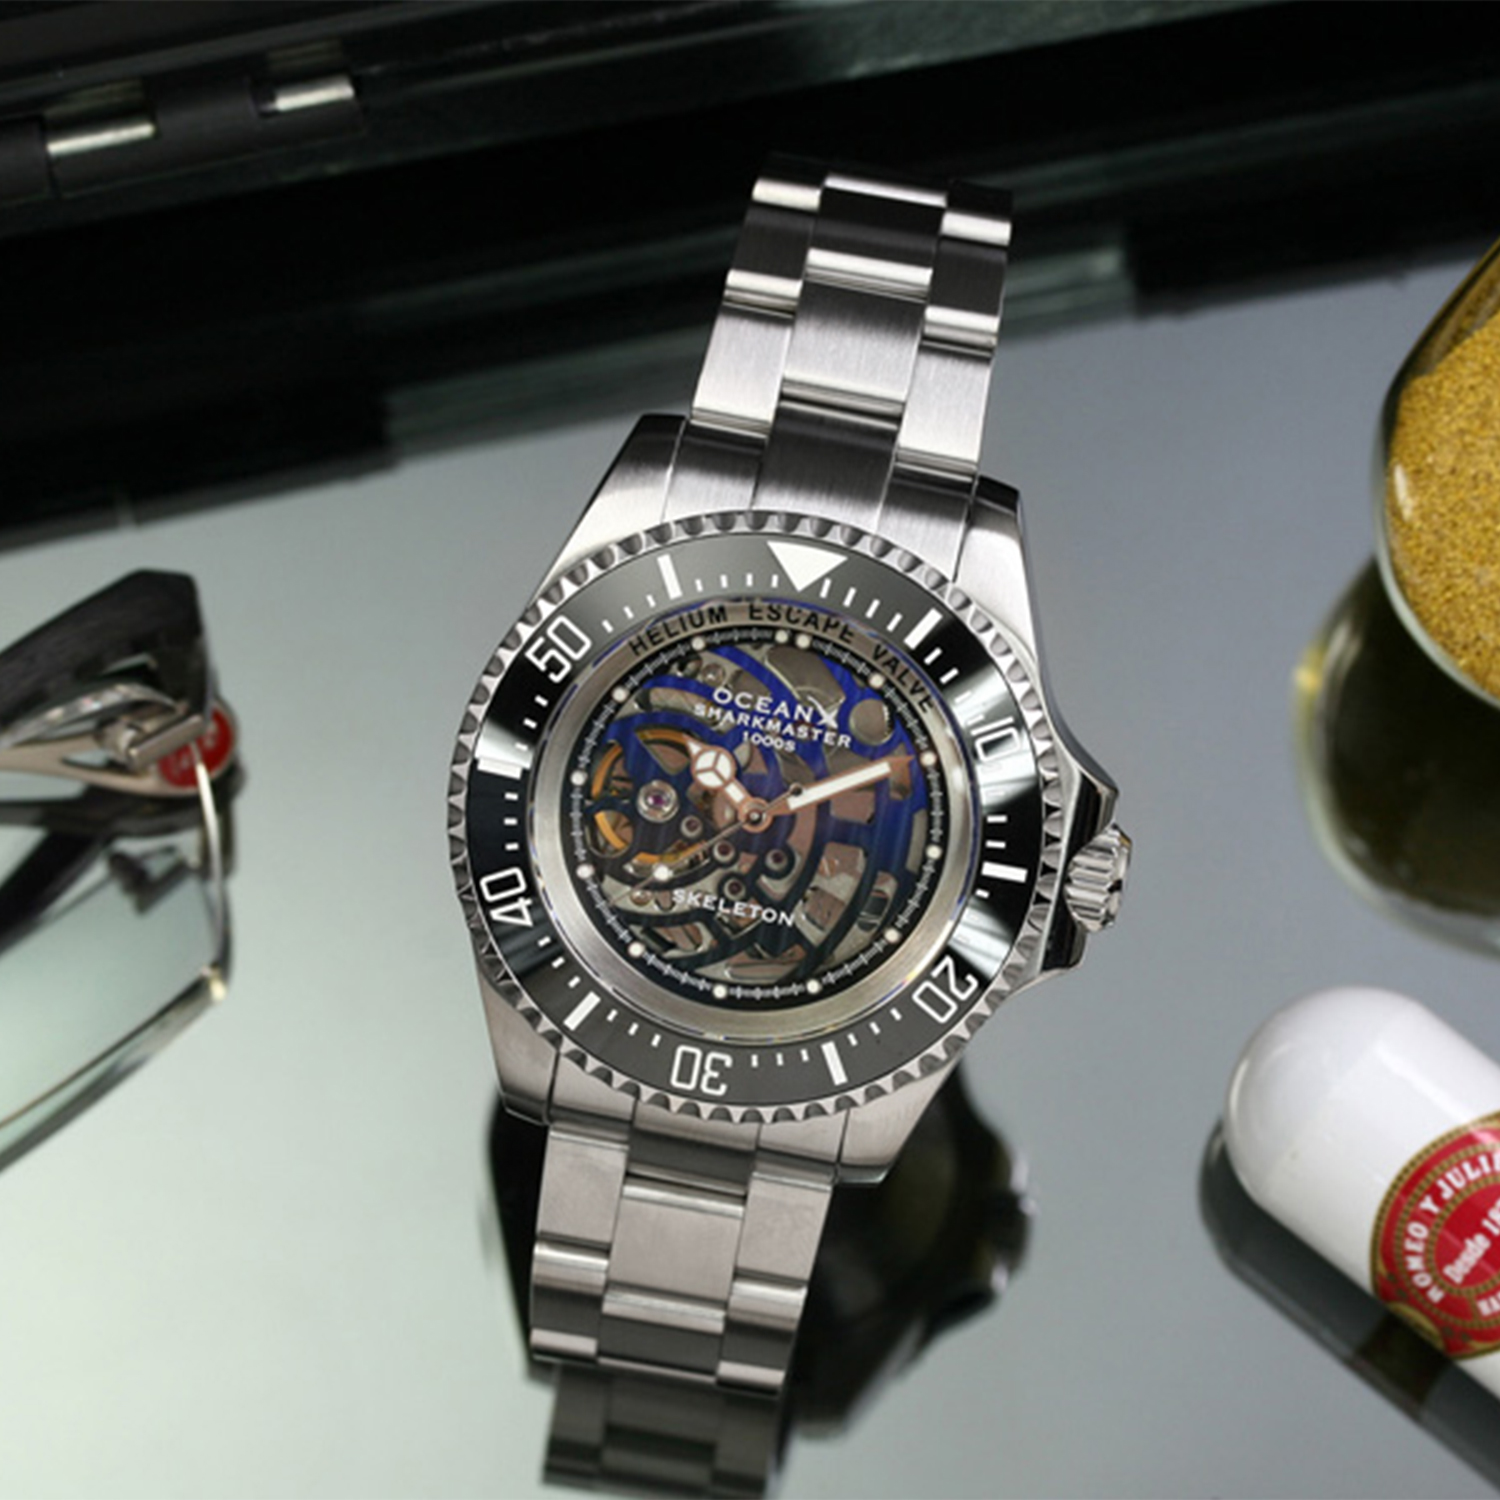 OceanX Sharkmaster 1000 Skeleton 44mm Automatic Men's Diver Watch WR1000m SMS1012S Limited Edition